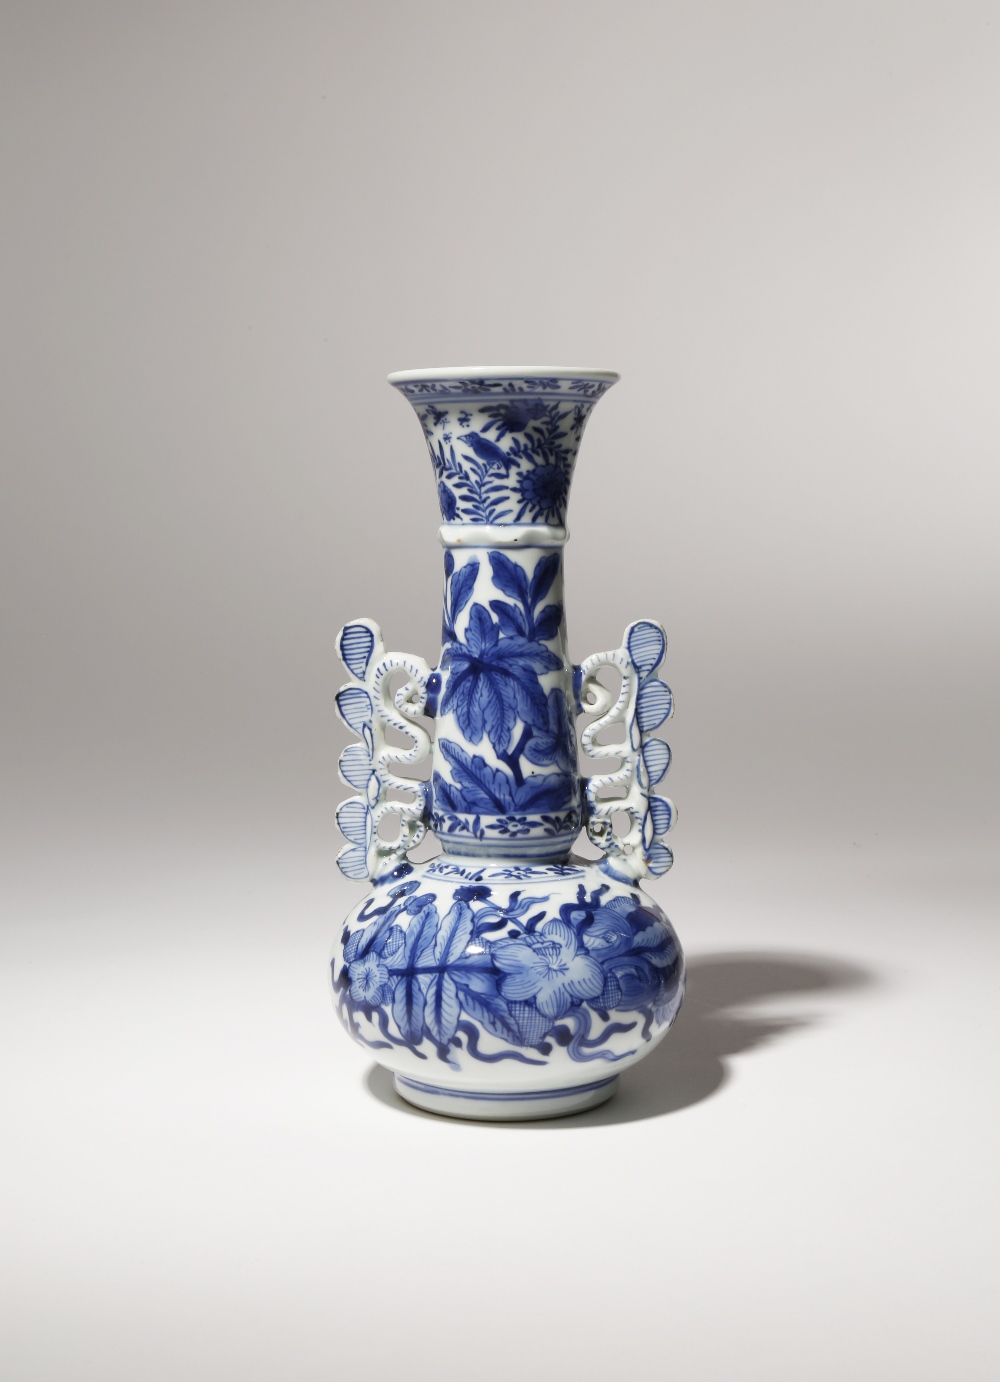 A CHINESE BLUE AND WHITE VENETIAN GLASS STYLE BOTTLE VASE KANGXI 1662-1722 The compressed circular